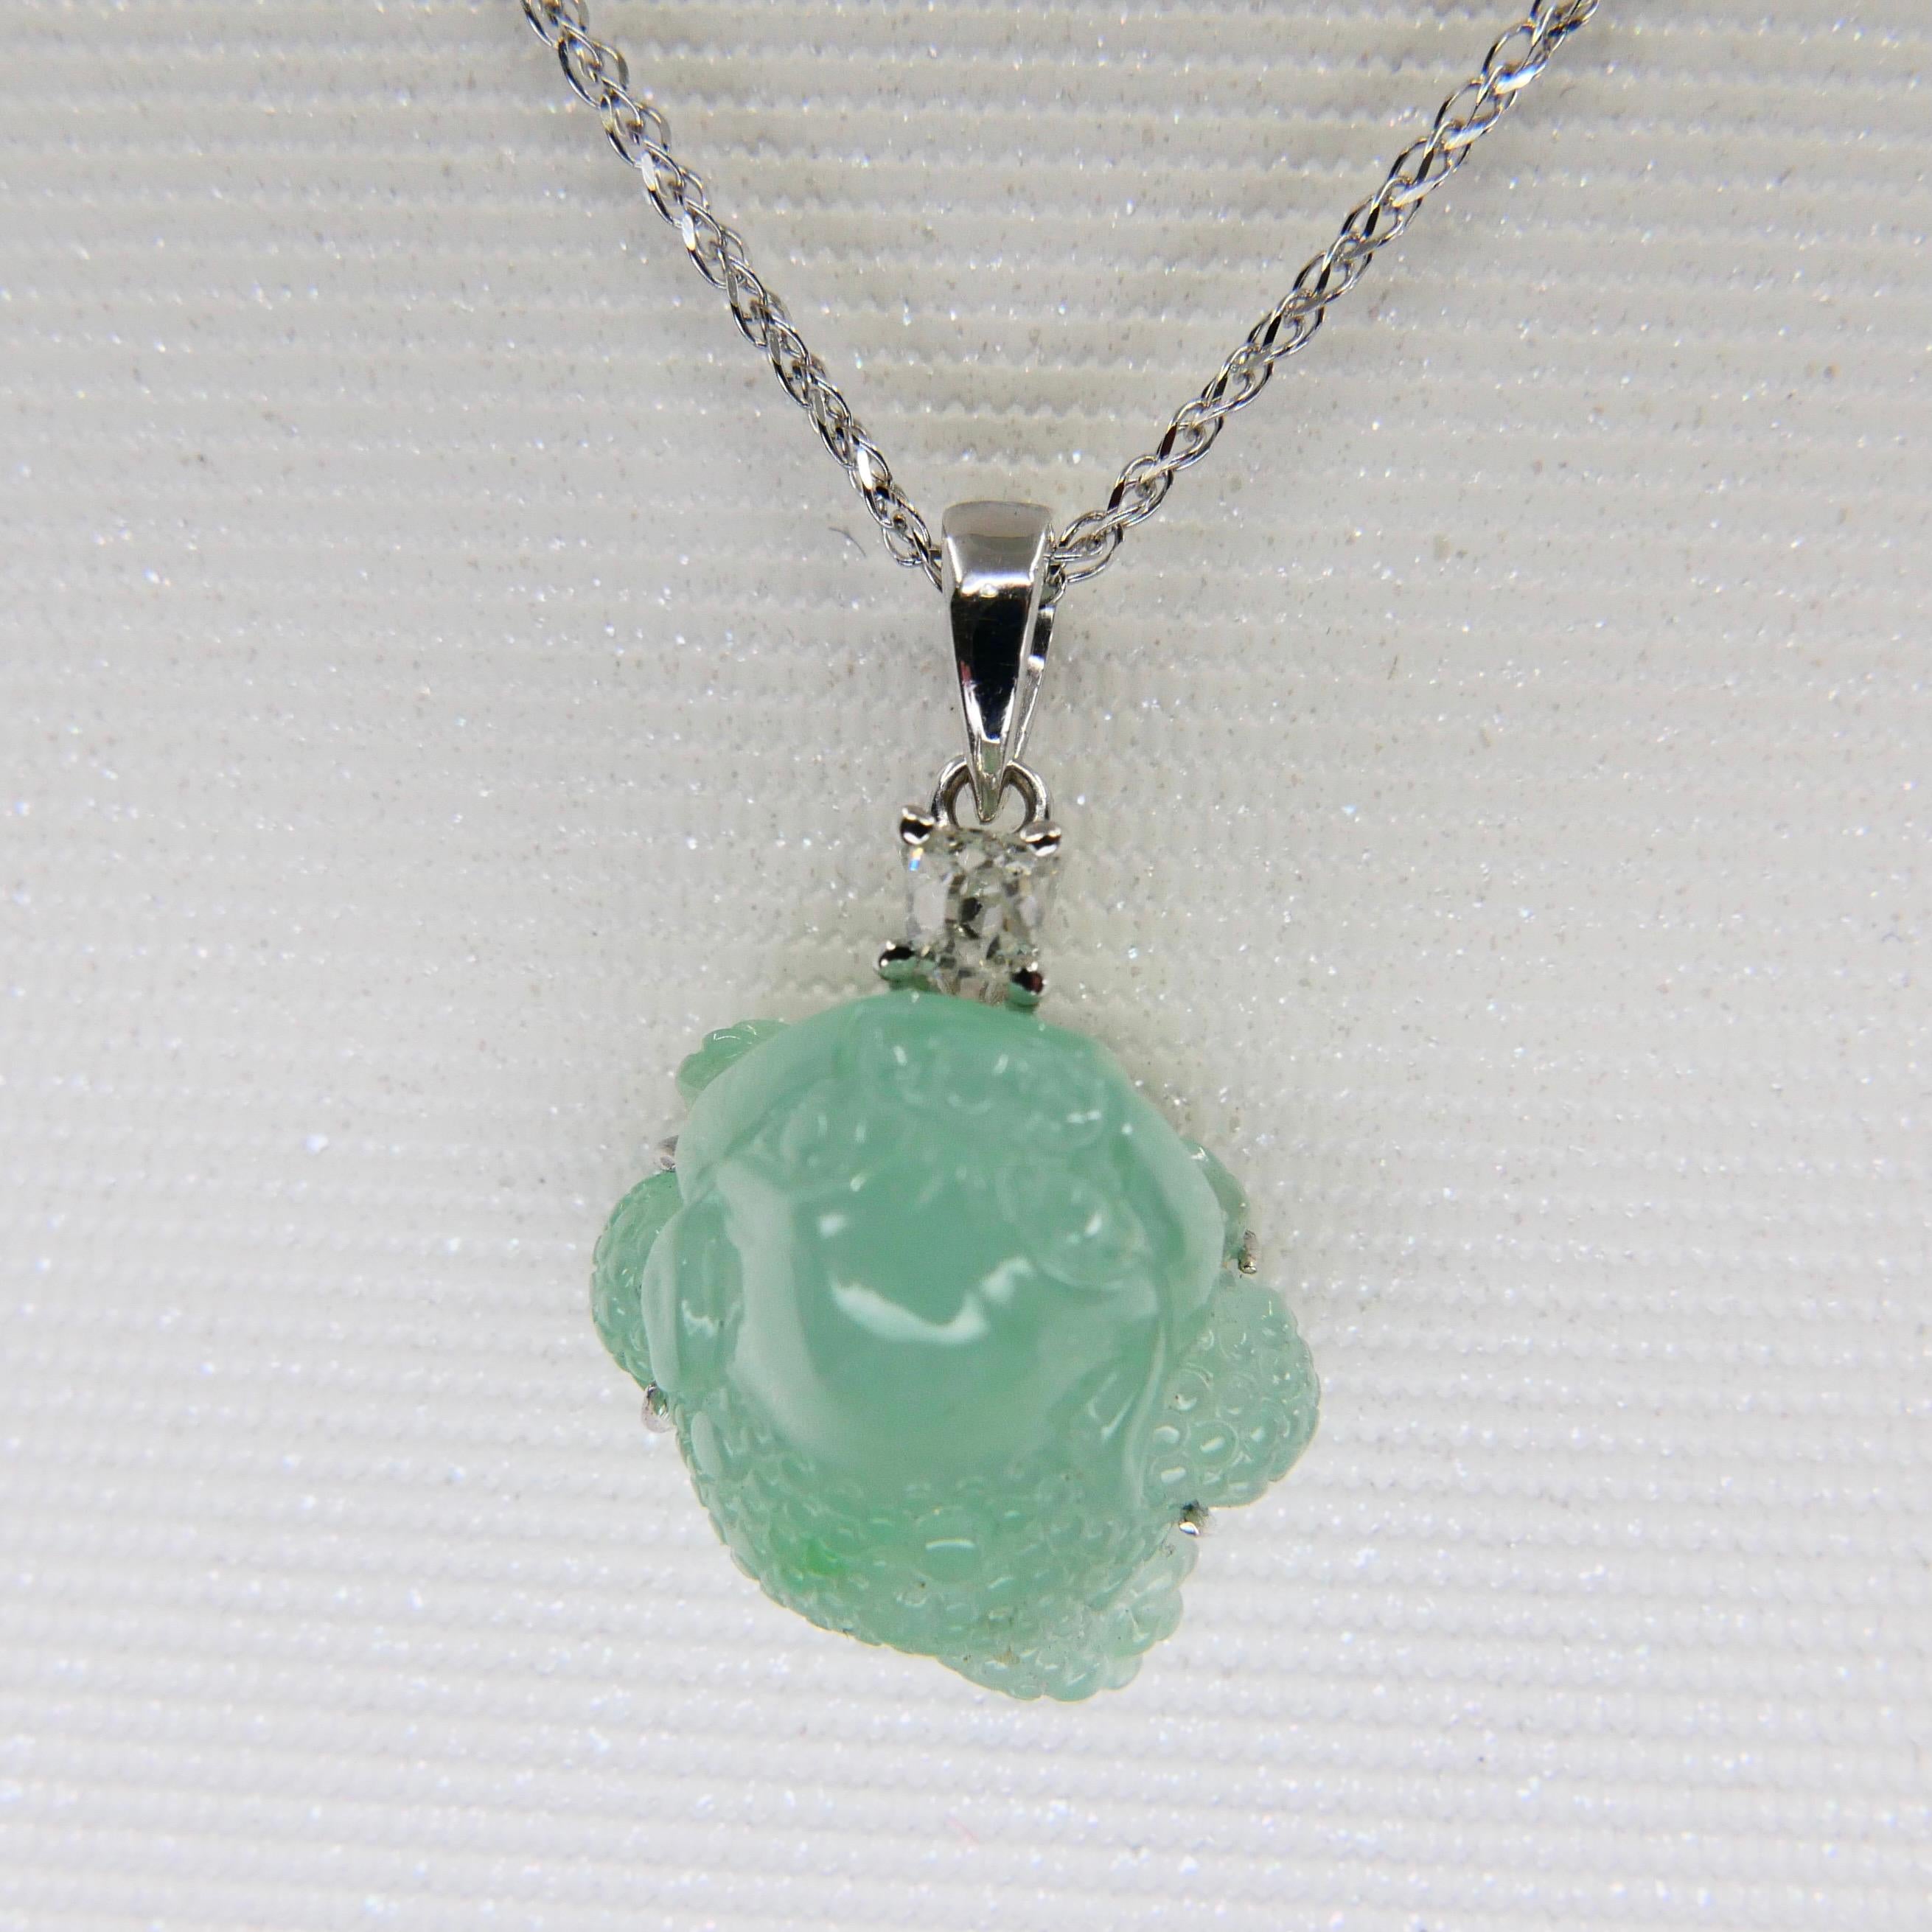 Certified Type A Jade Mythical Beast Drop Pendant Necklace, Icy Green 10